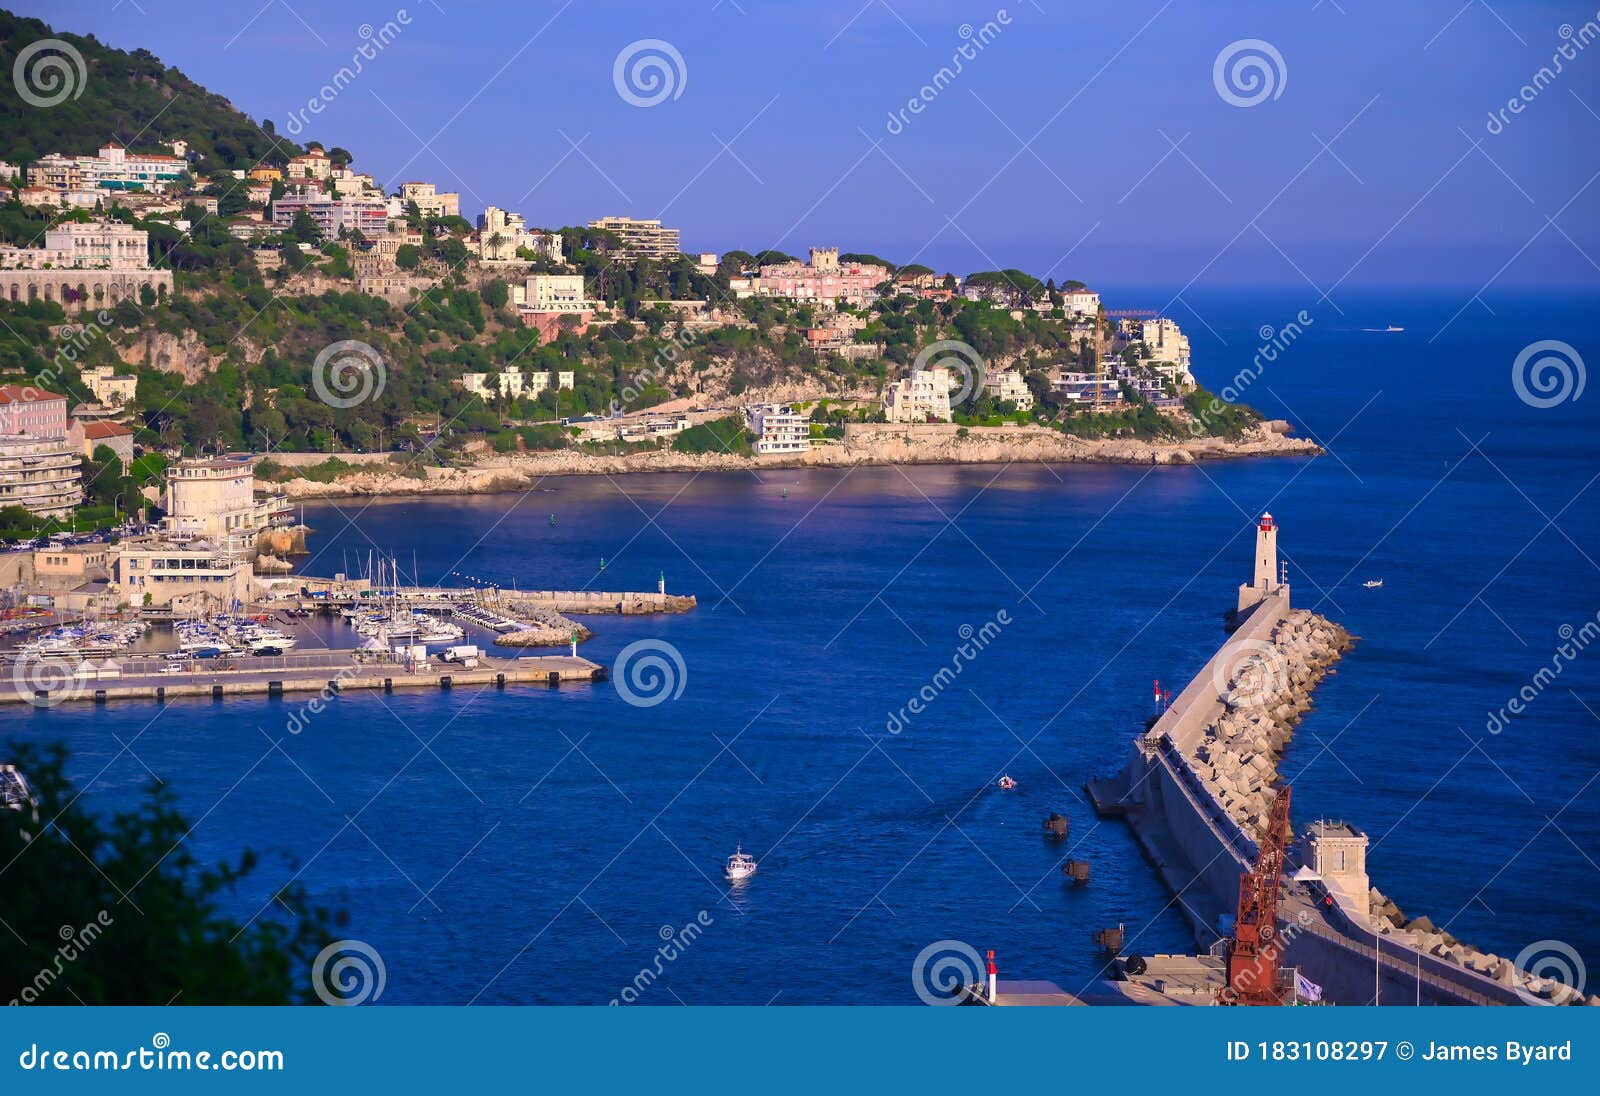 The Port of Nice on the Mediterranean Sea at Nice, France Stock Image ...